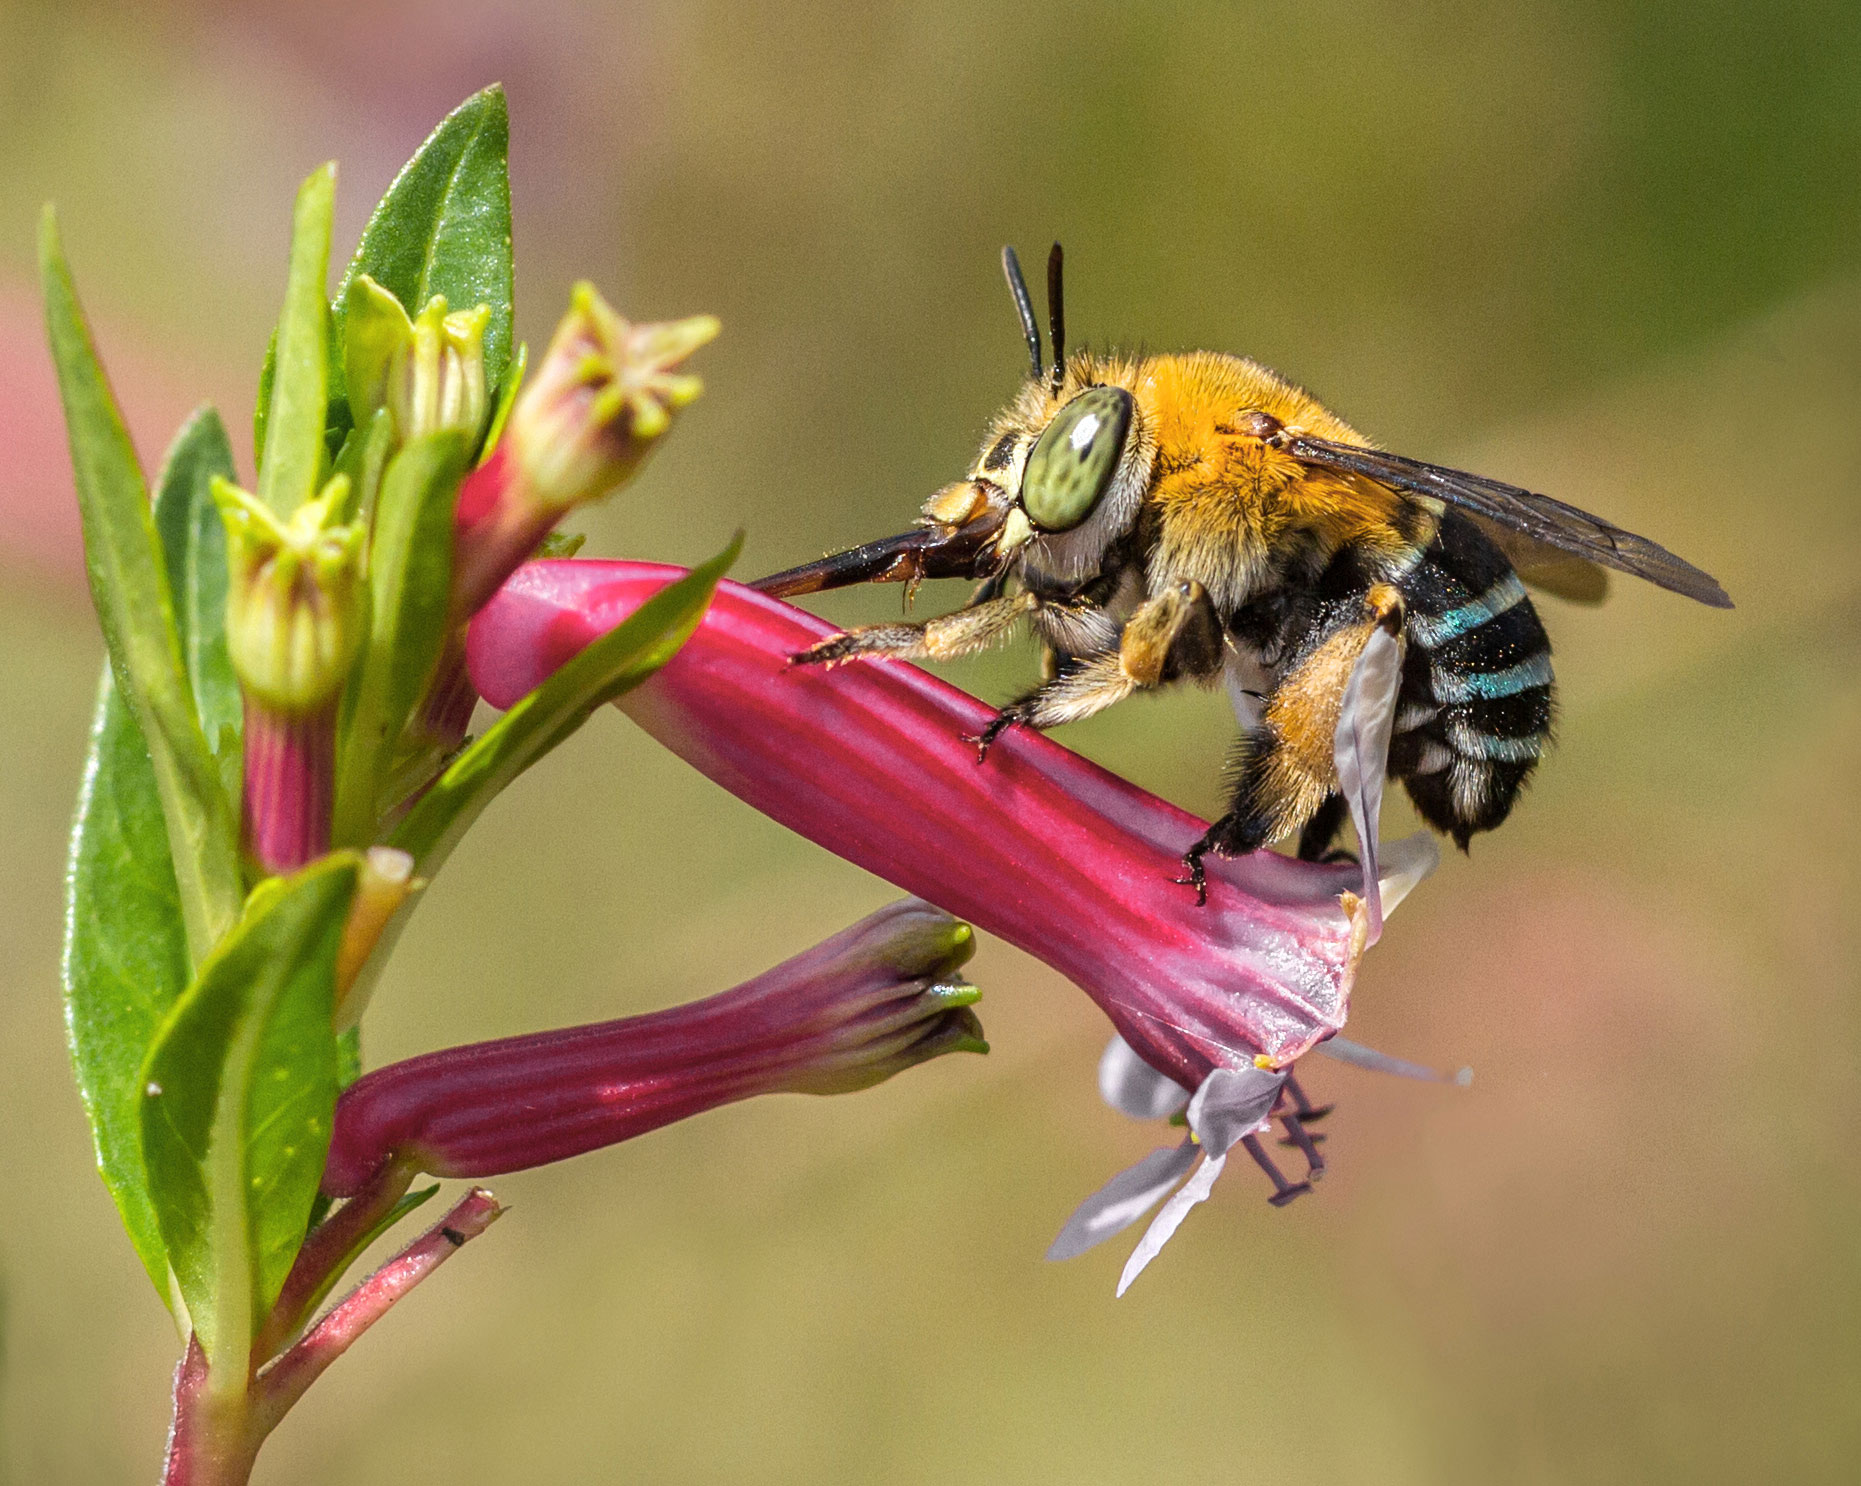 Blue-banded Bees - Land for Wildlife